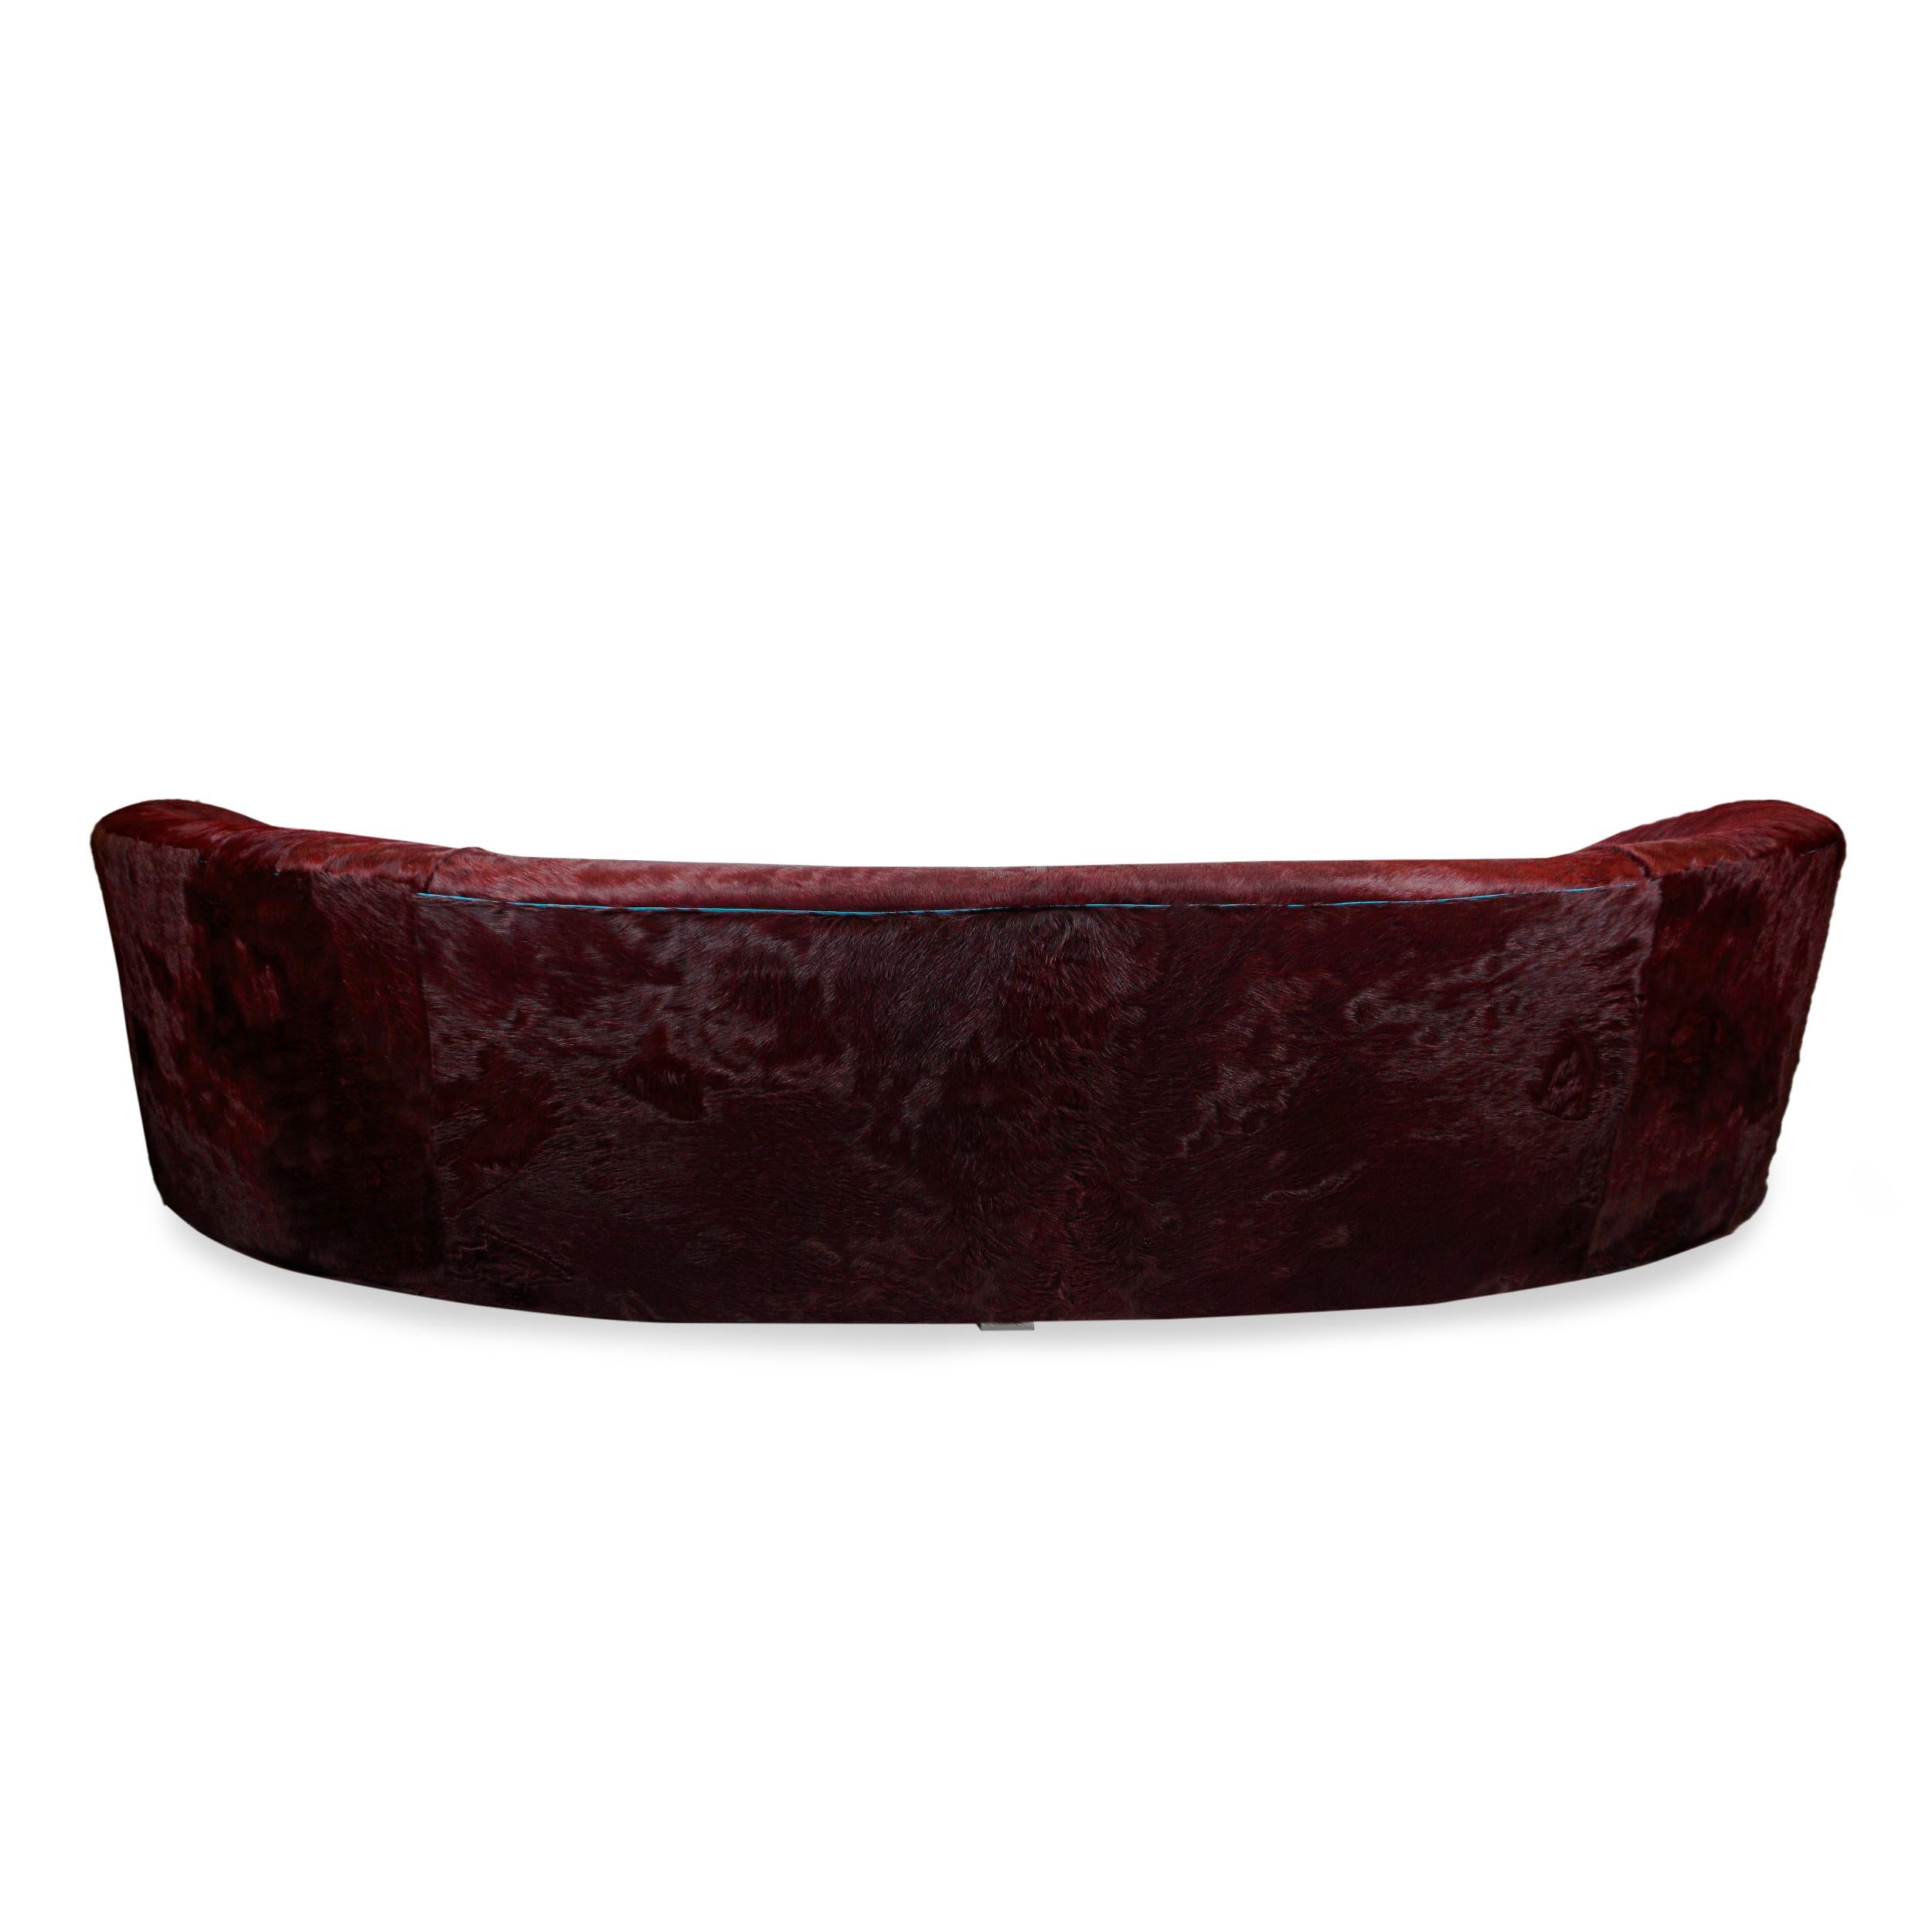 Curved Sofa with Oxblood Cowhide and Fantastical Printed Velvet, Slope Arm For Sale 4